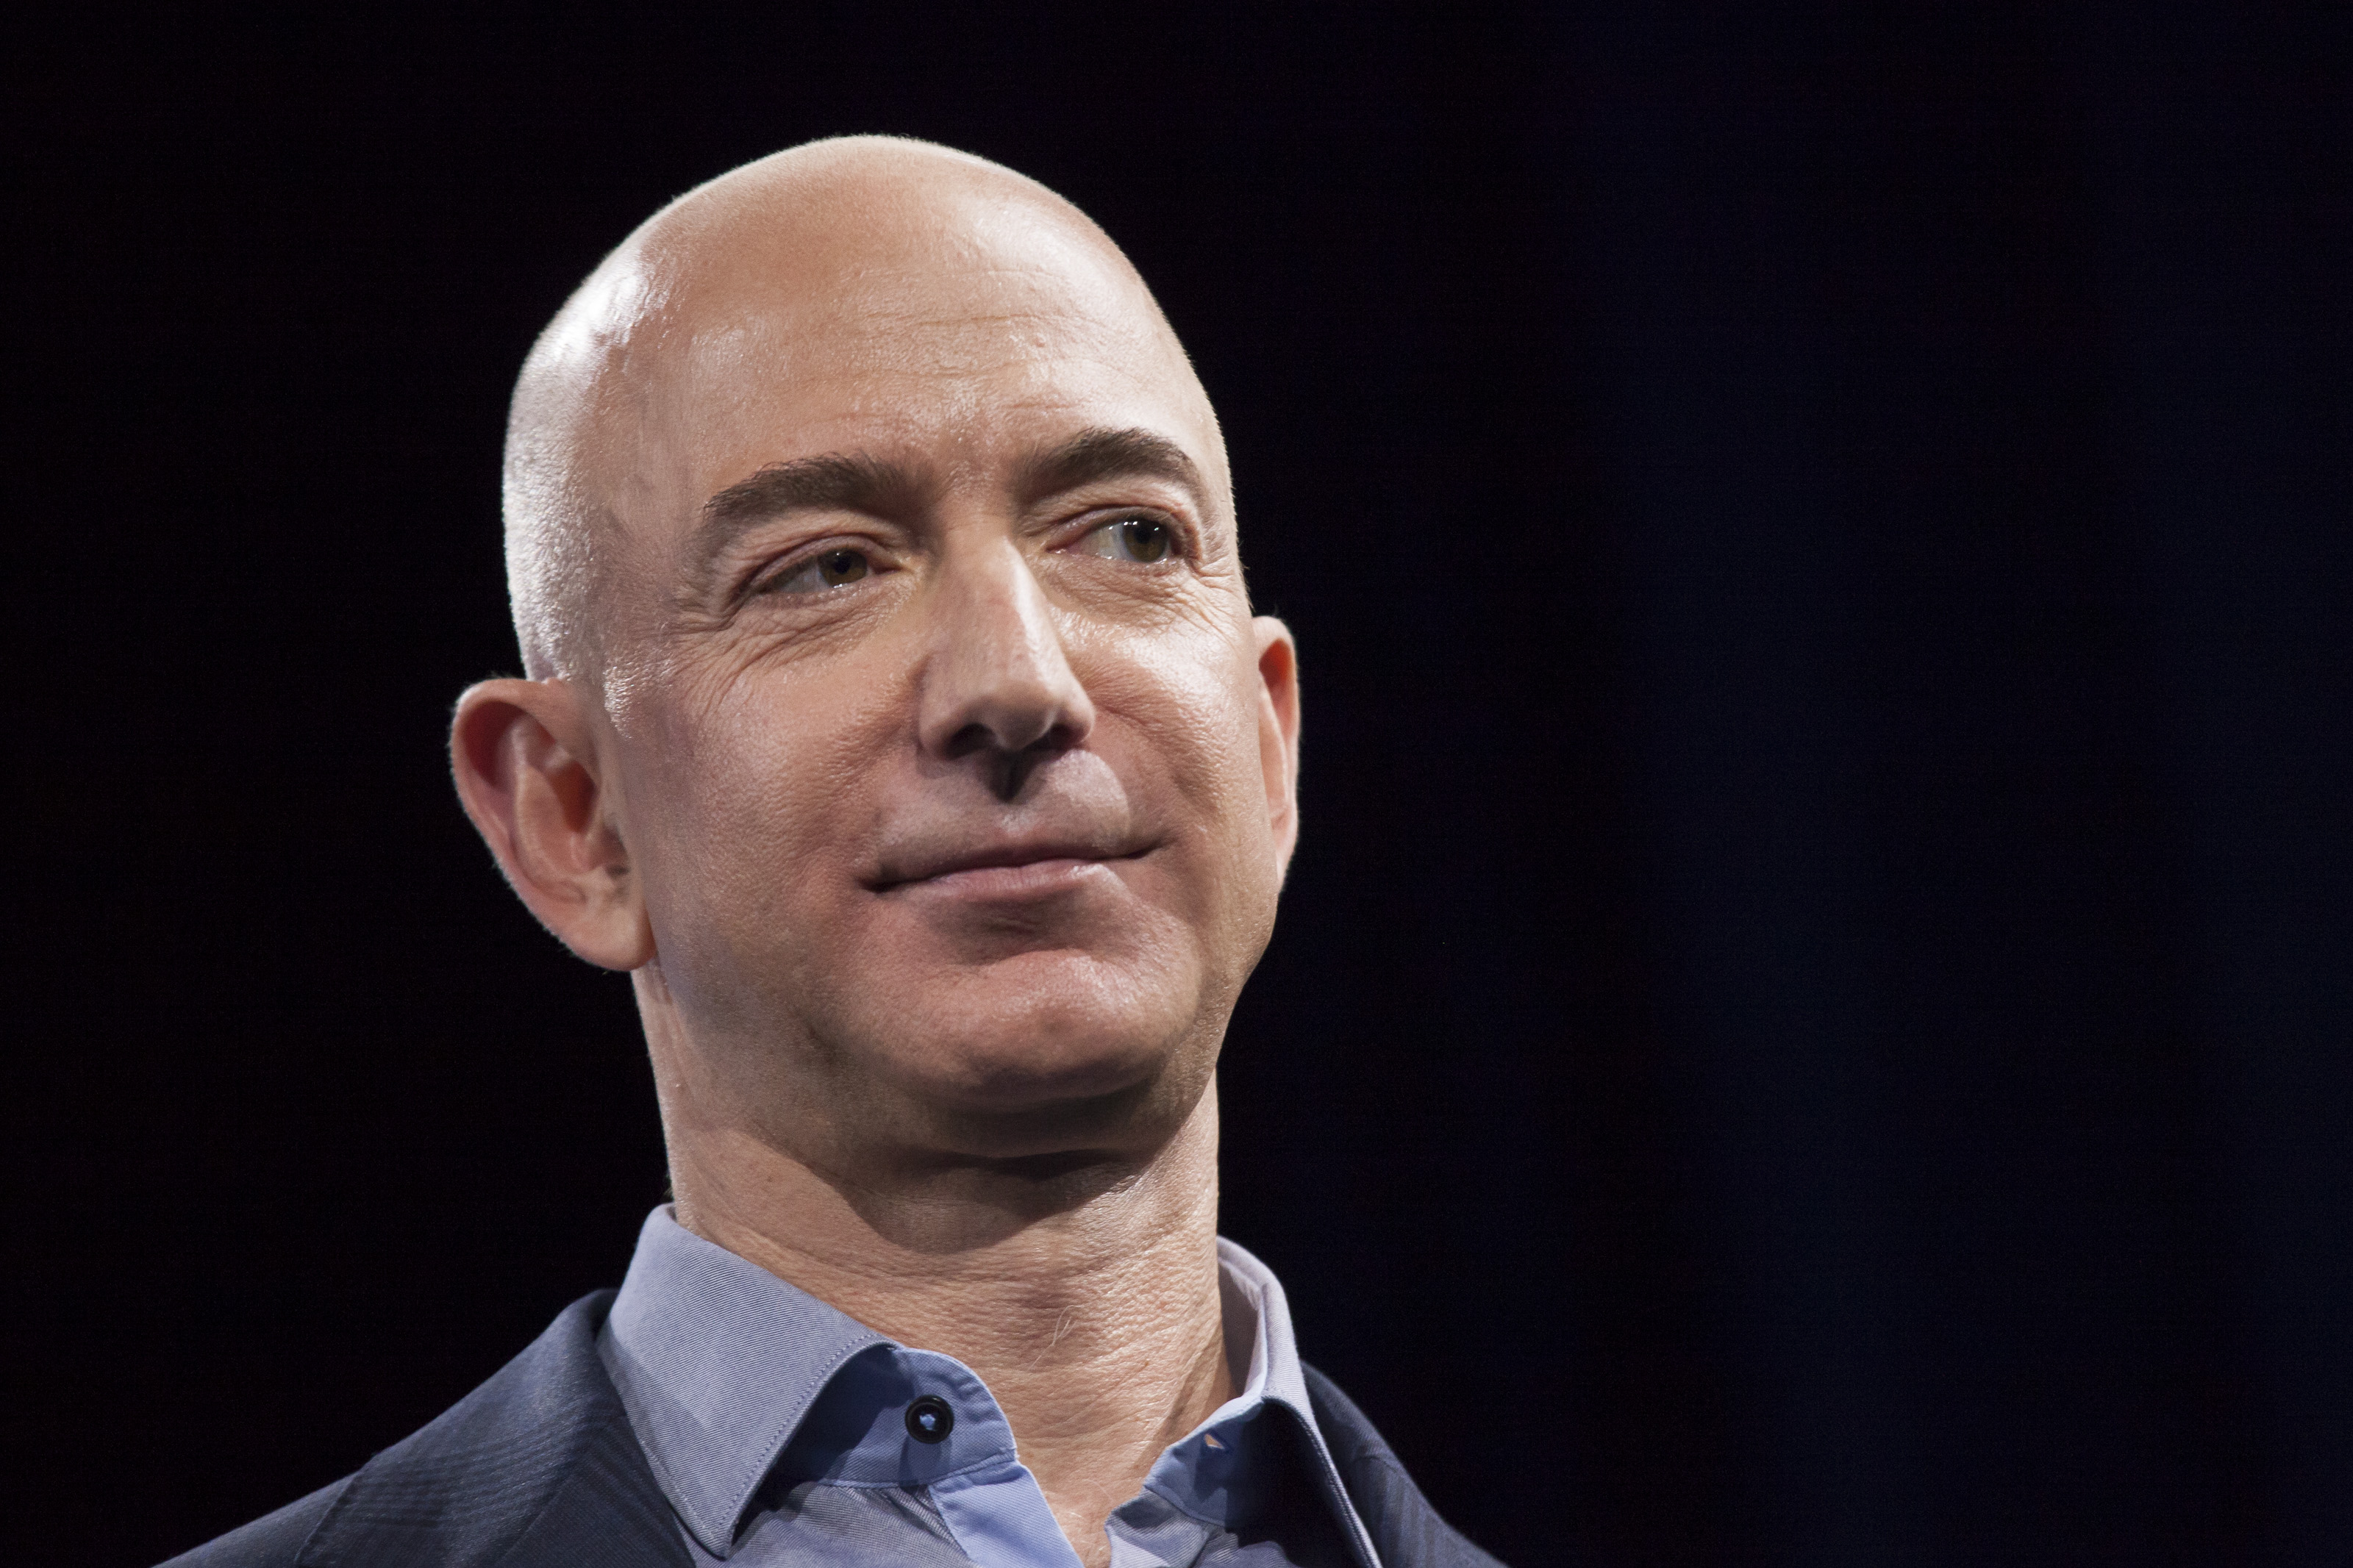 Jeff Bezos Pledges $15B To Fight Climate Change On The Only Planet He Currently Owns